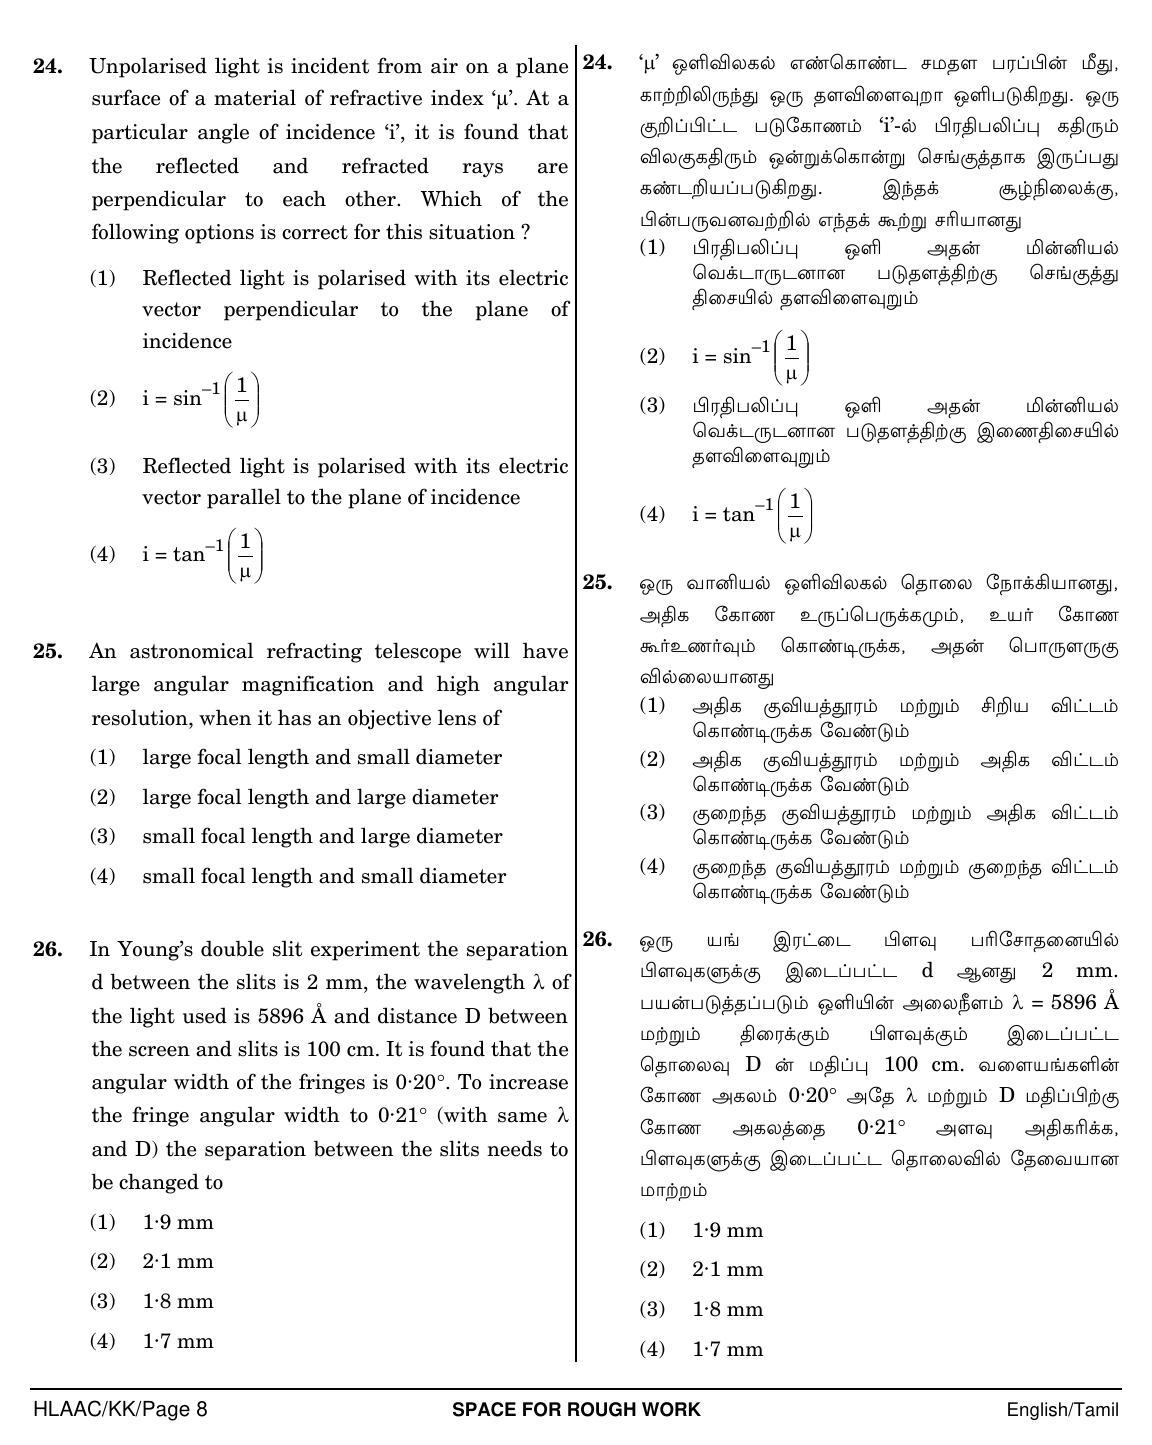 NEET Tamil KK 2018 Question Paper - Page 8